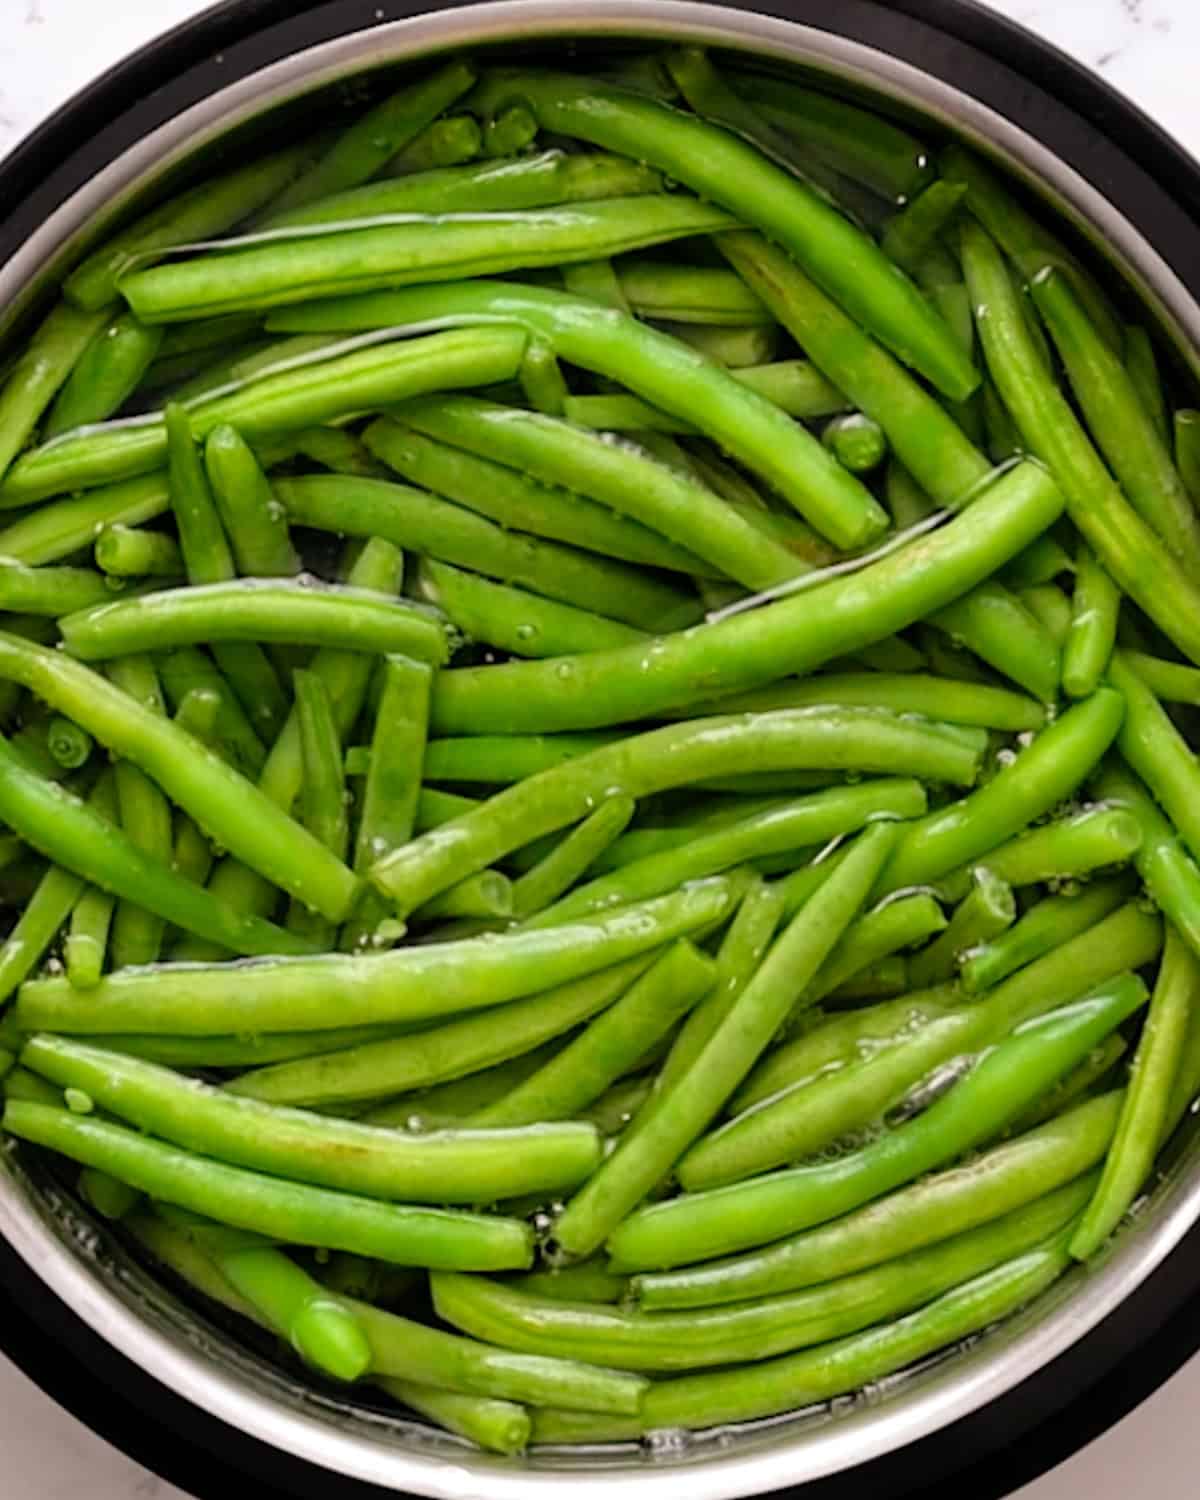 How to Make Sautéed Green Beans - blanching green beans in boiling water